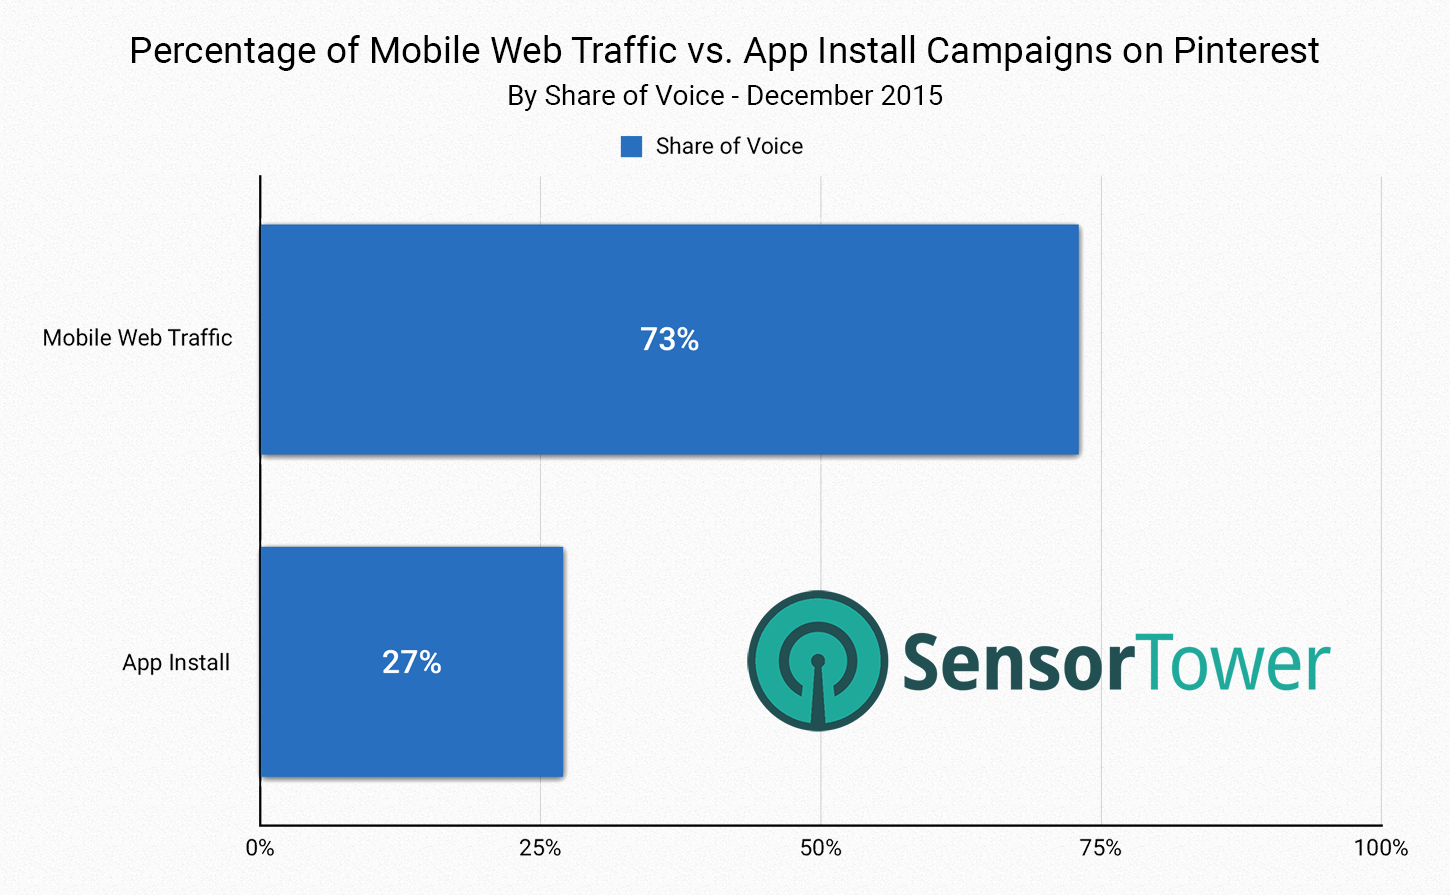 Mobile Traffic Versus App Install Campaigns on Pinterest in December 2015